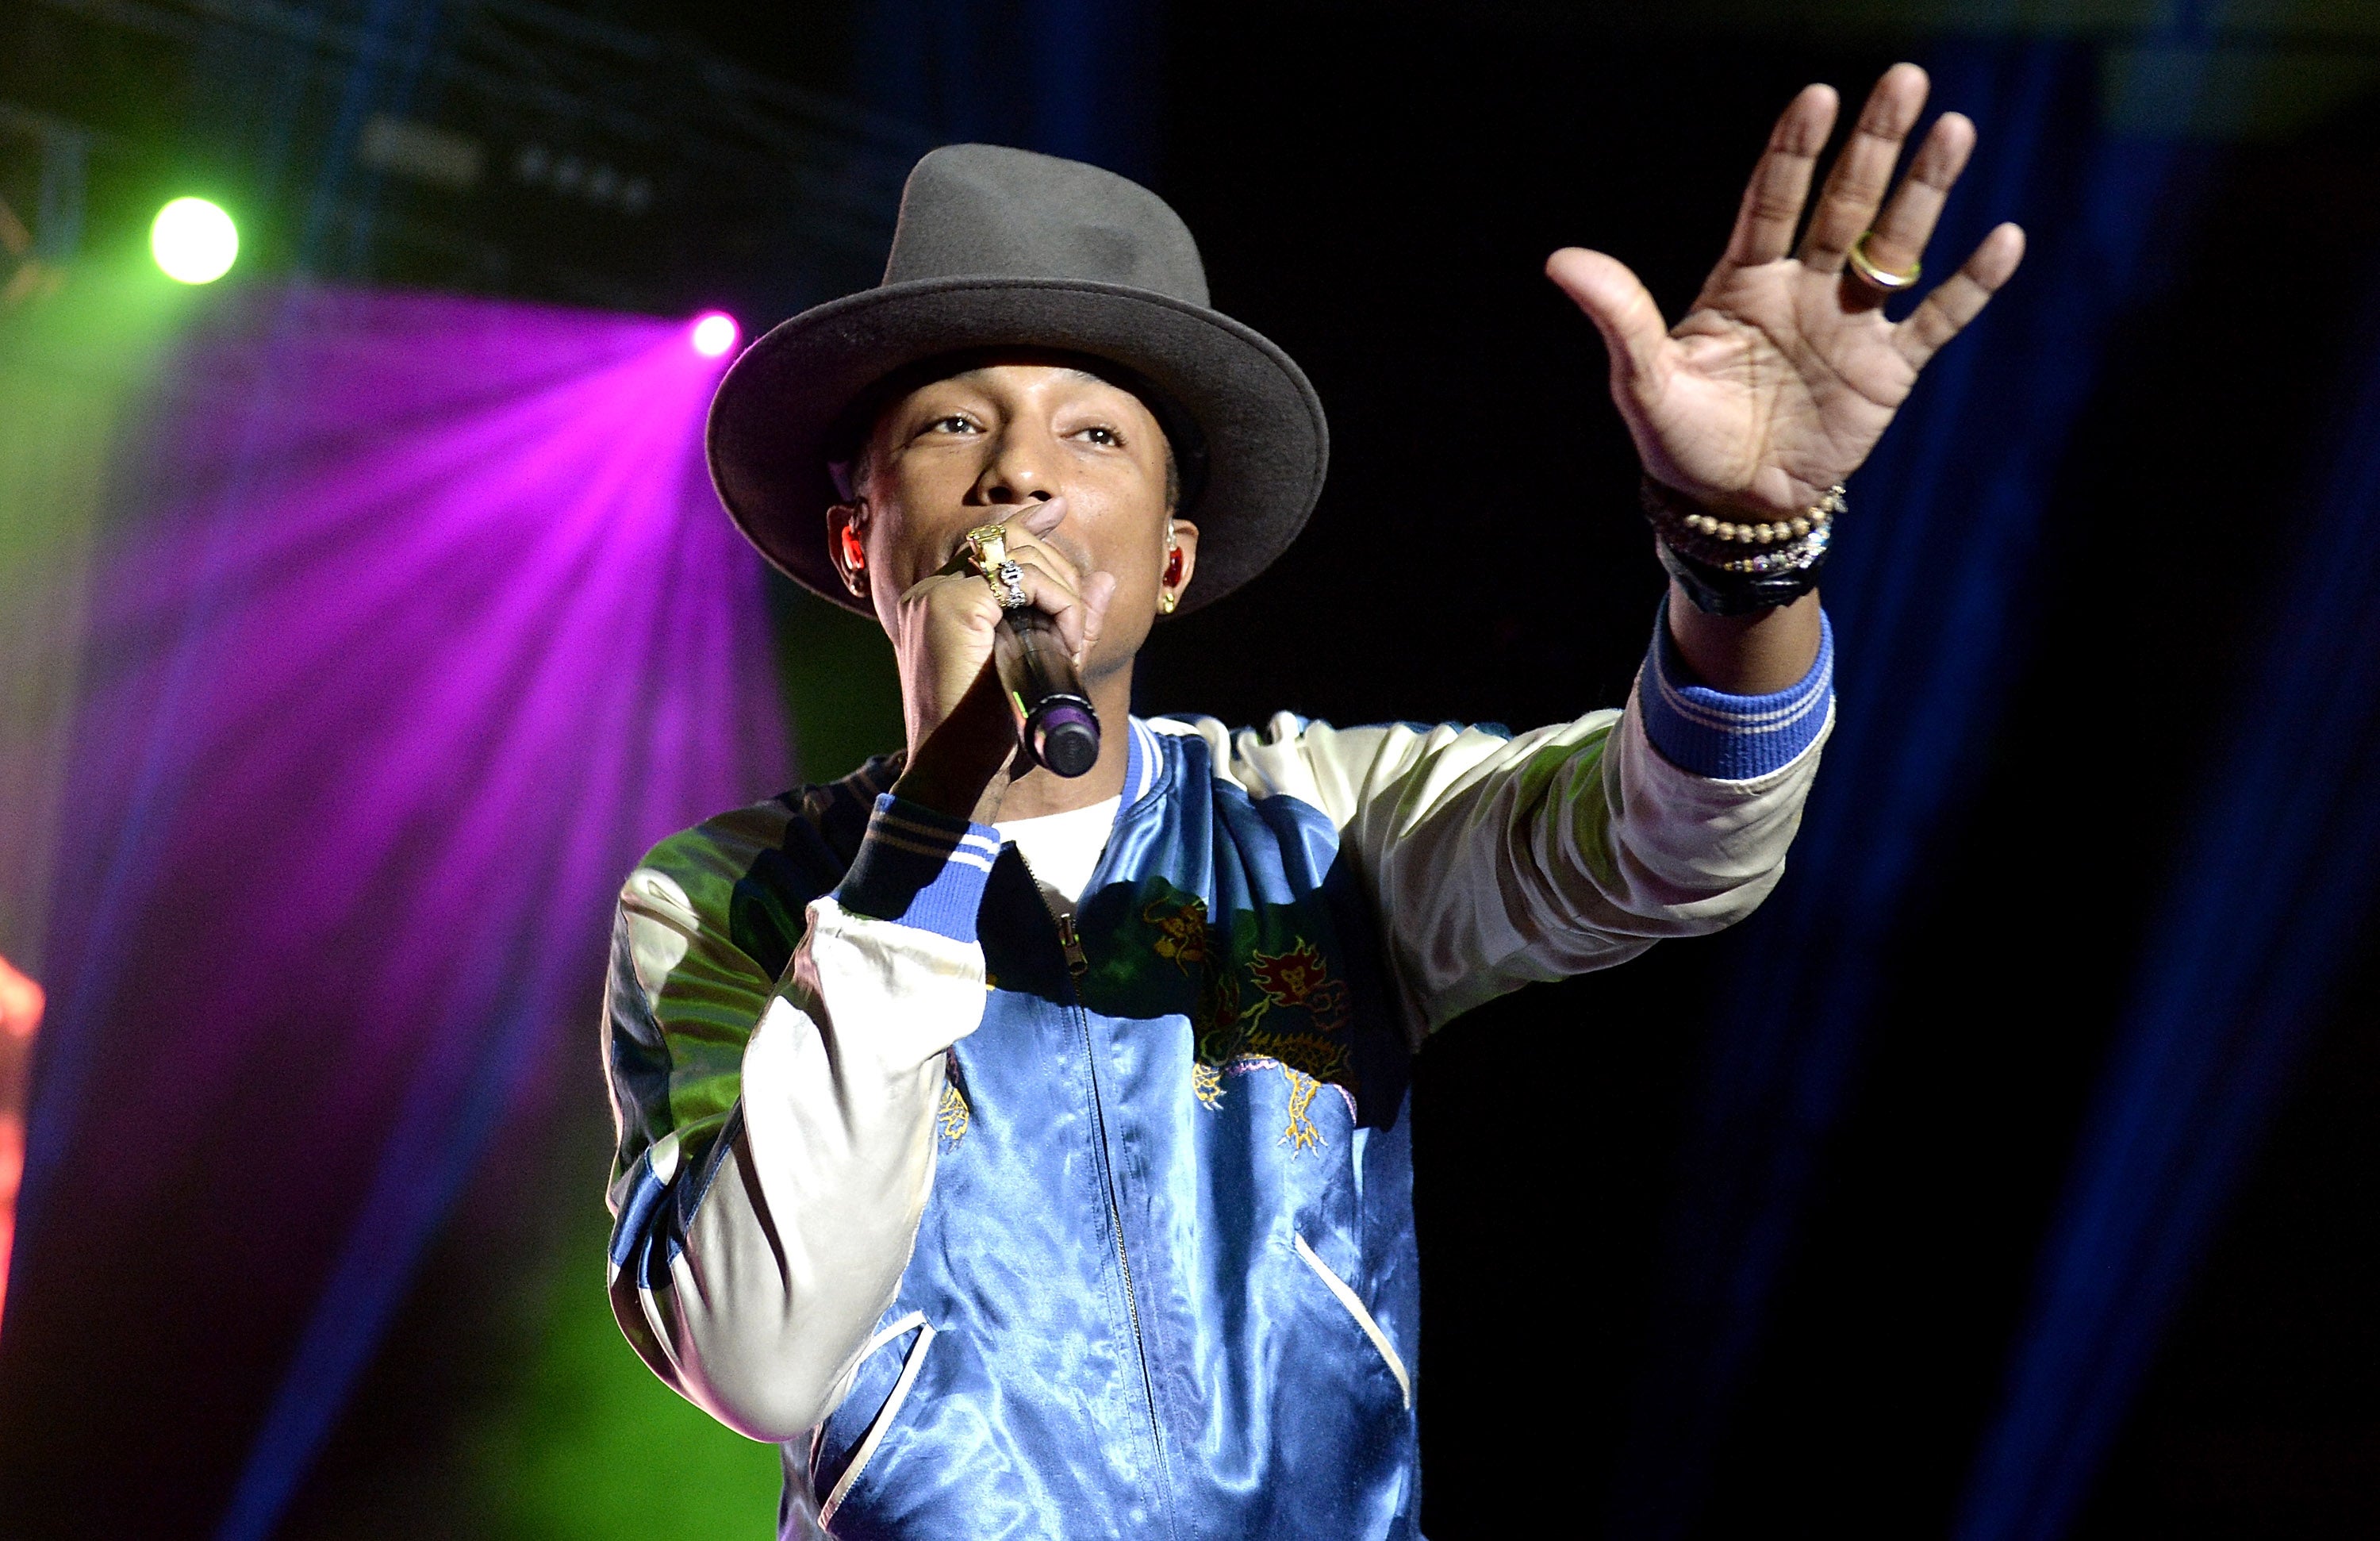 Pharrell Williams and Moby have said they want to attend the dancing man party in LA